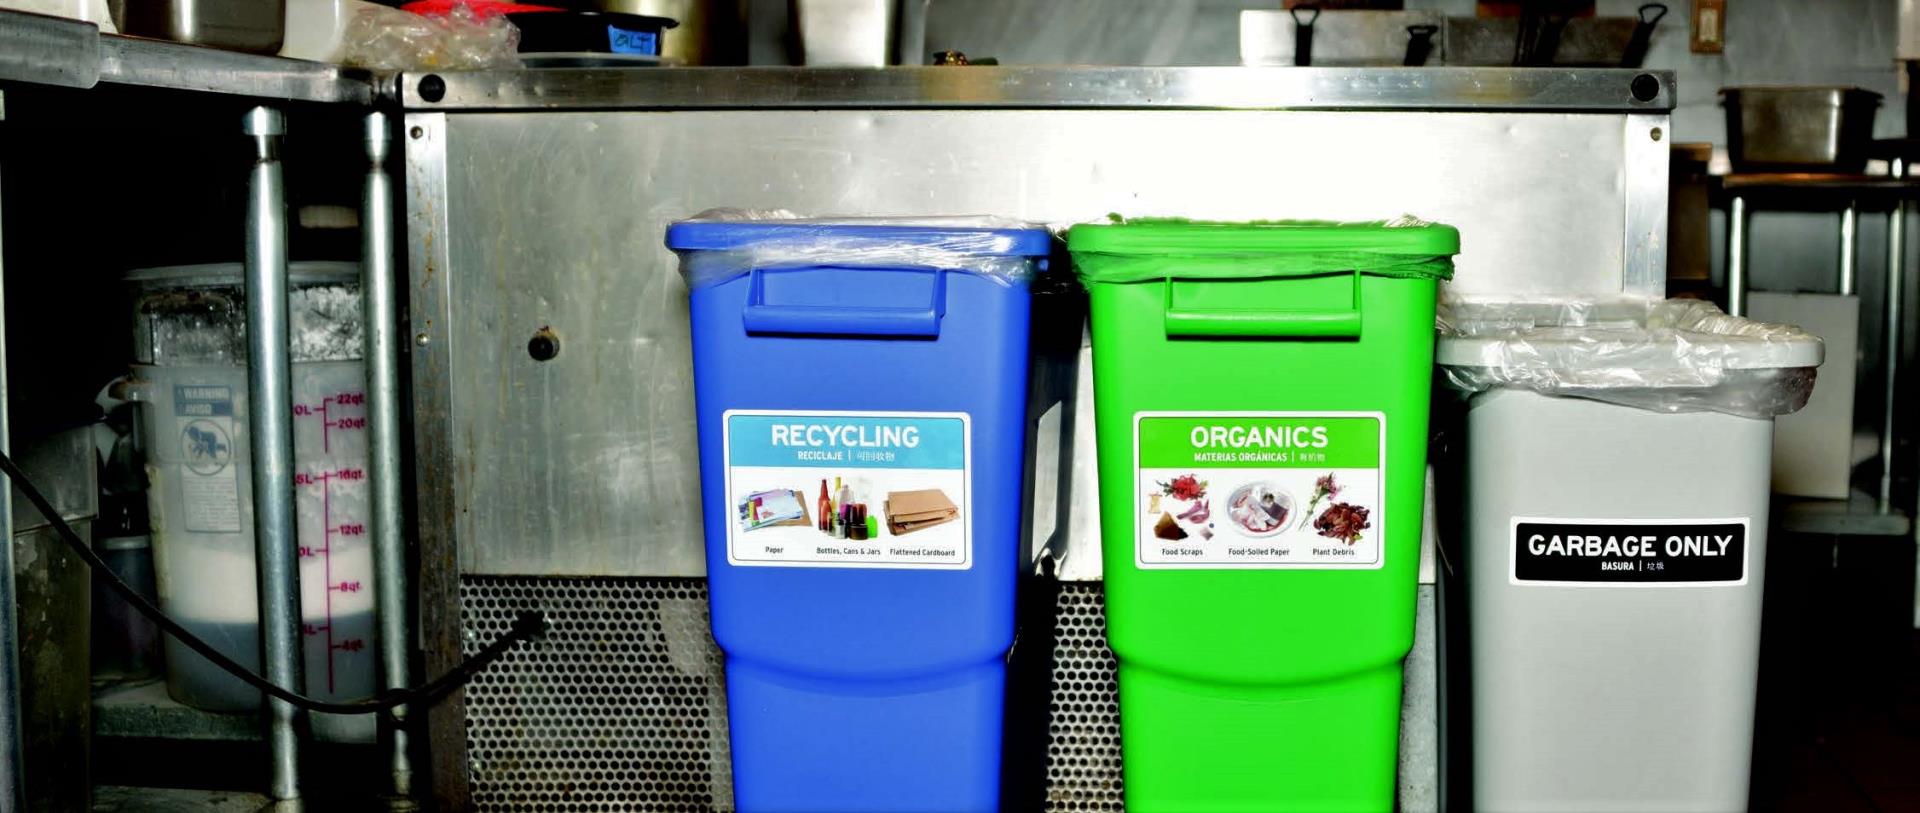 Indoor Recycling Bins for Commercial Businesses. 3 separate bins for recycling (blue), organics (green), and garbage (Gray) bins lined up next to each other